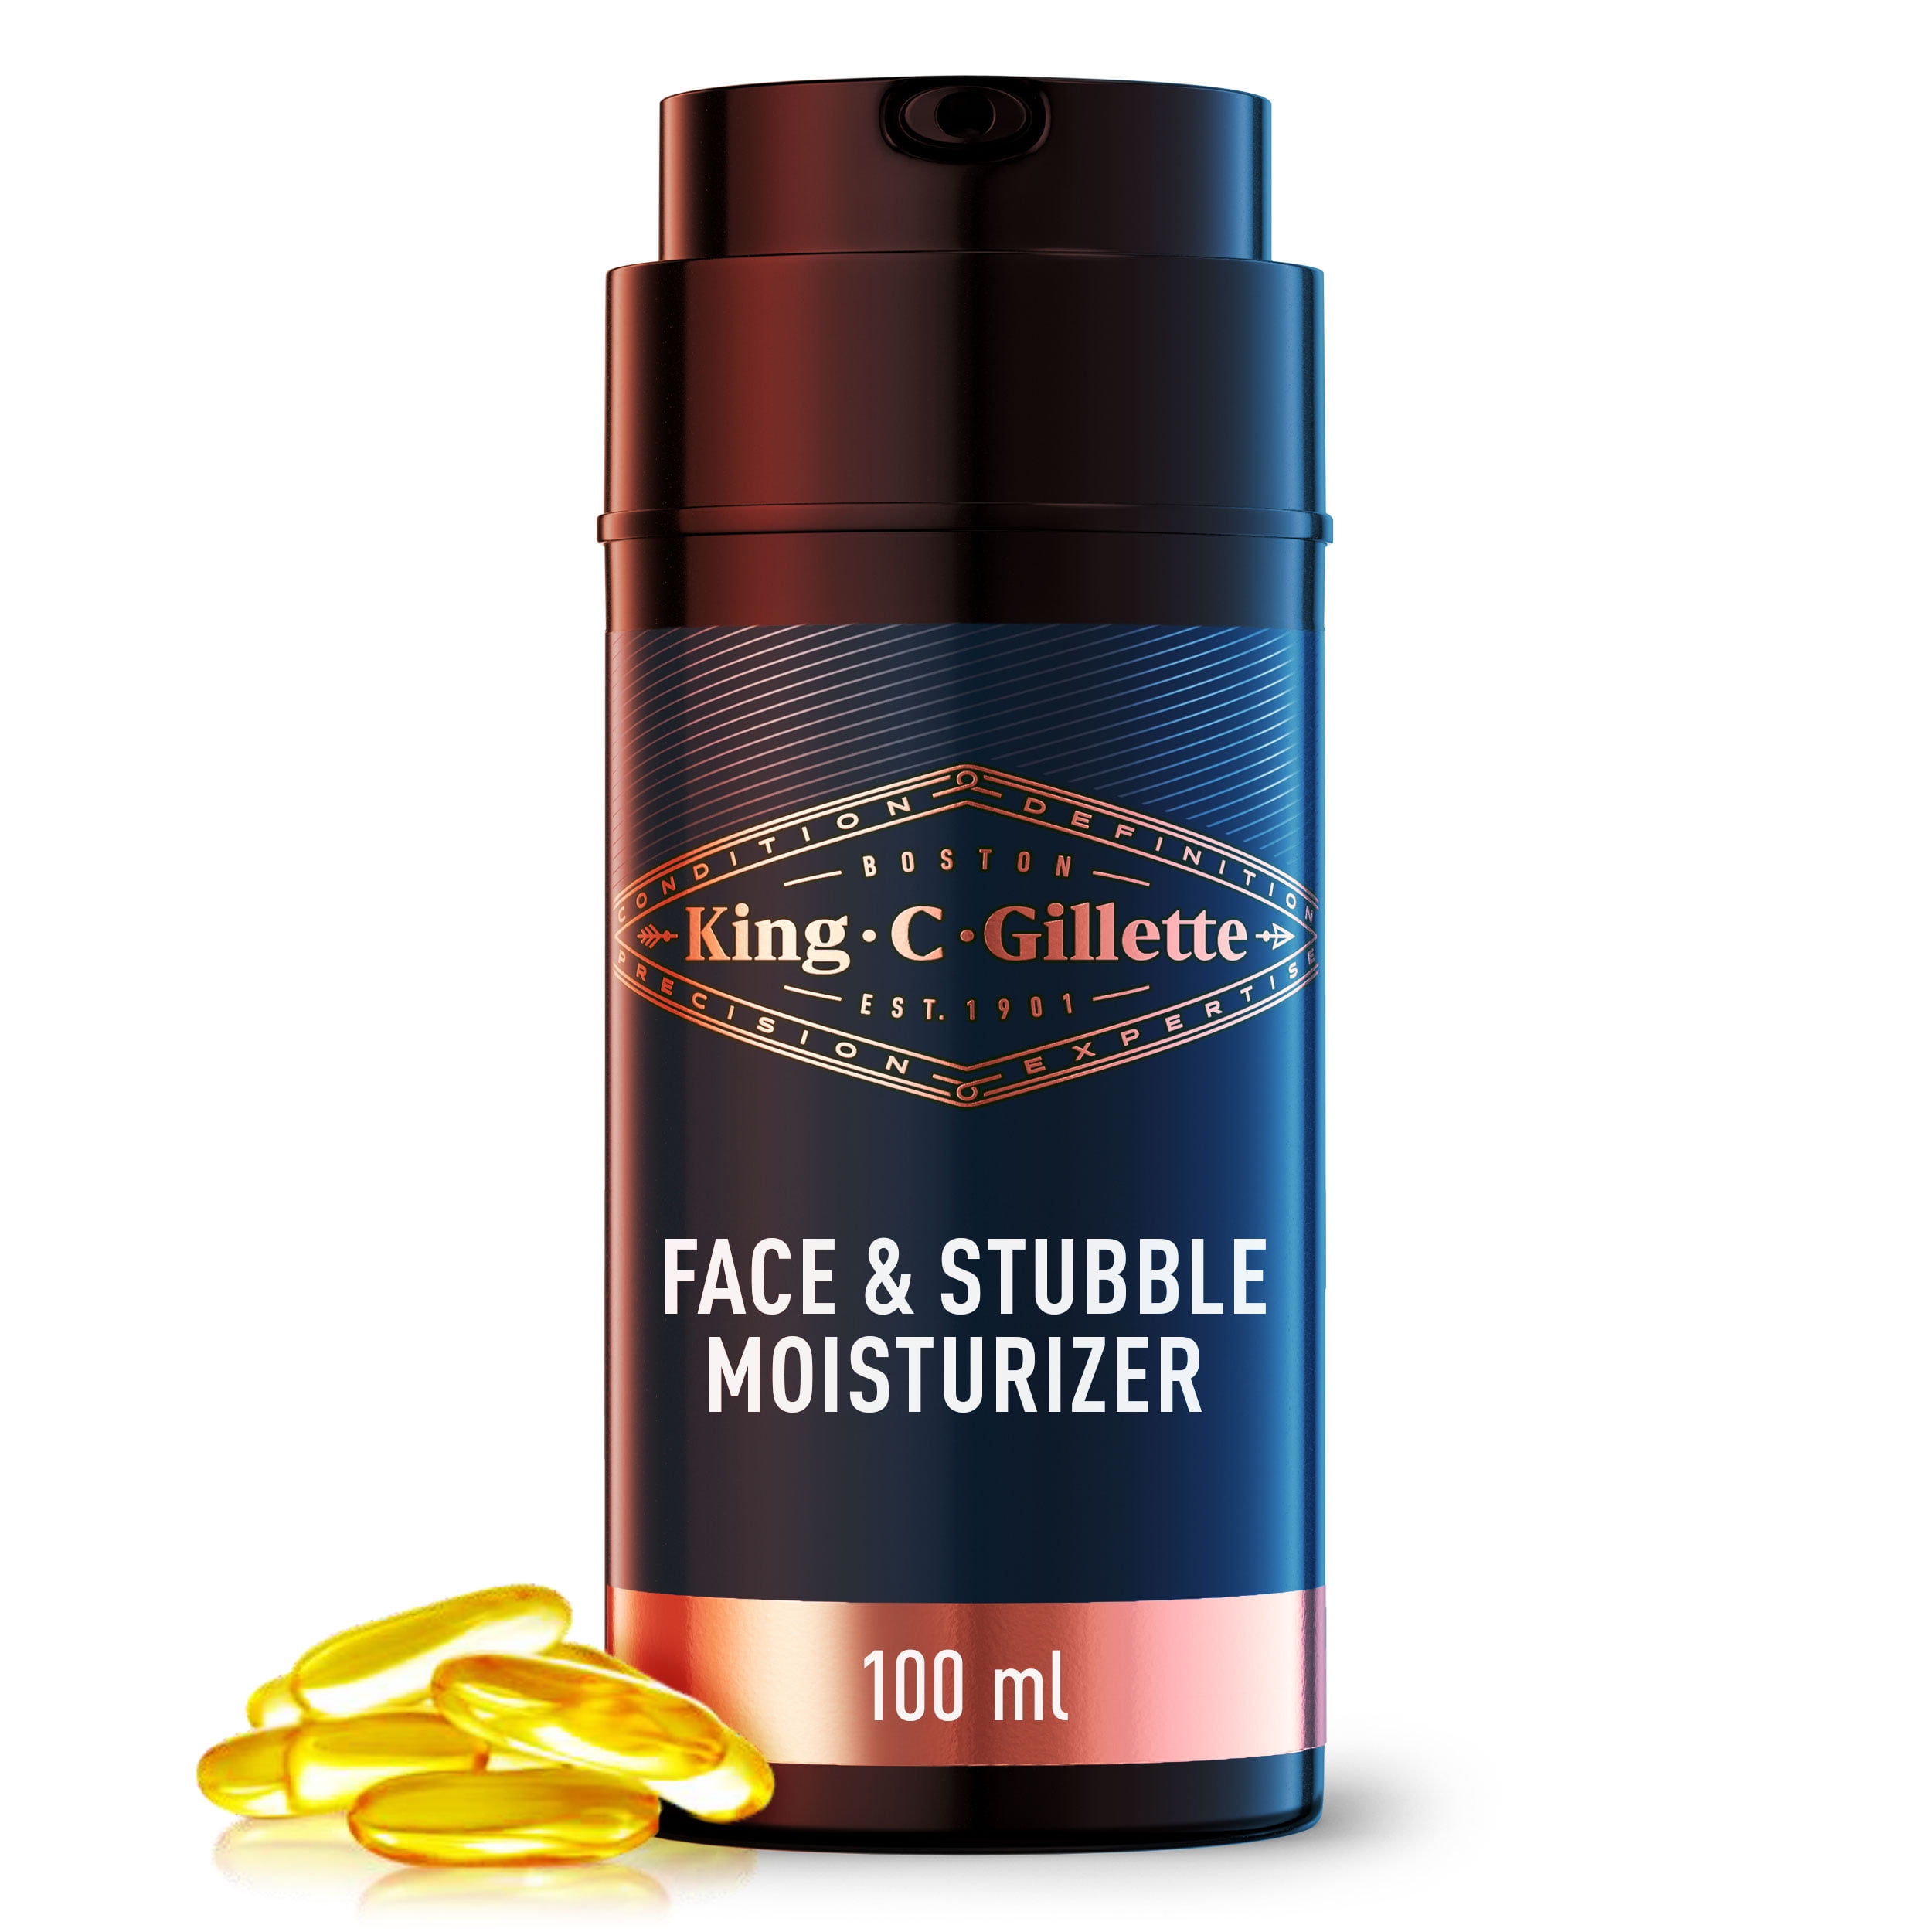 King C. Gillette Face & Stubble Moisturizer with Vitamin B3 and B5 complex